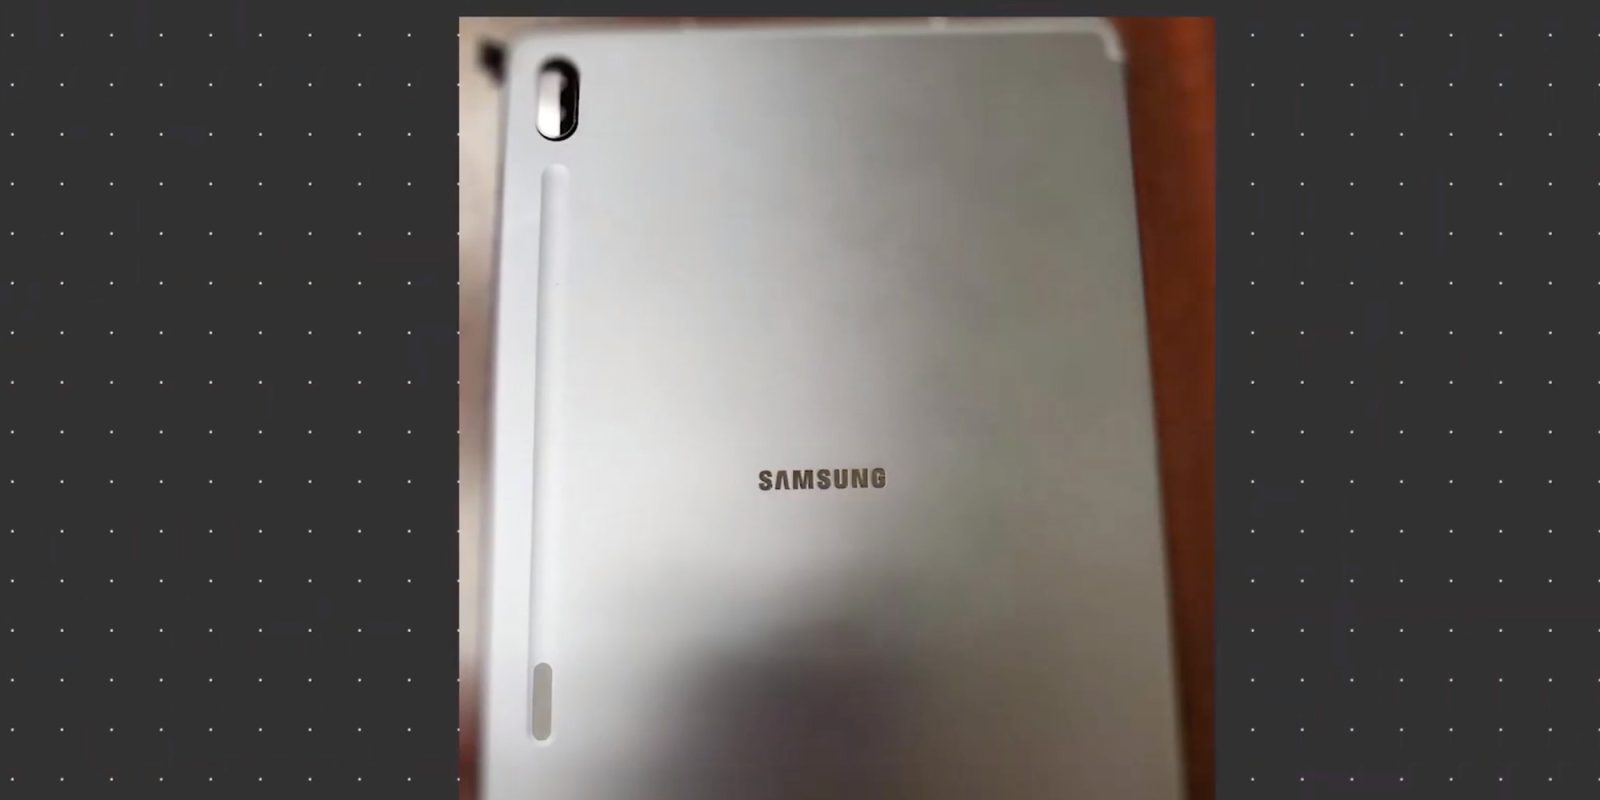 Samsung Galaxy Tab S6 review: The top Android tablet of 2019 - SamMobile